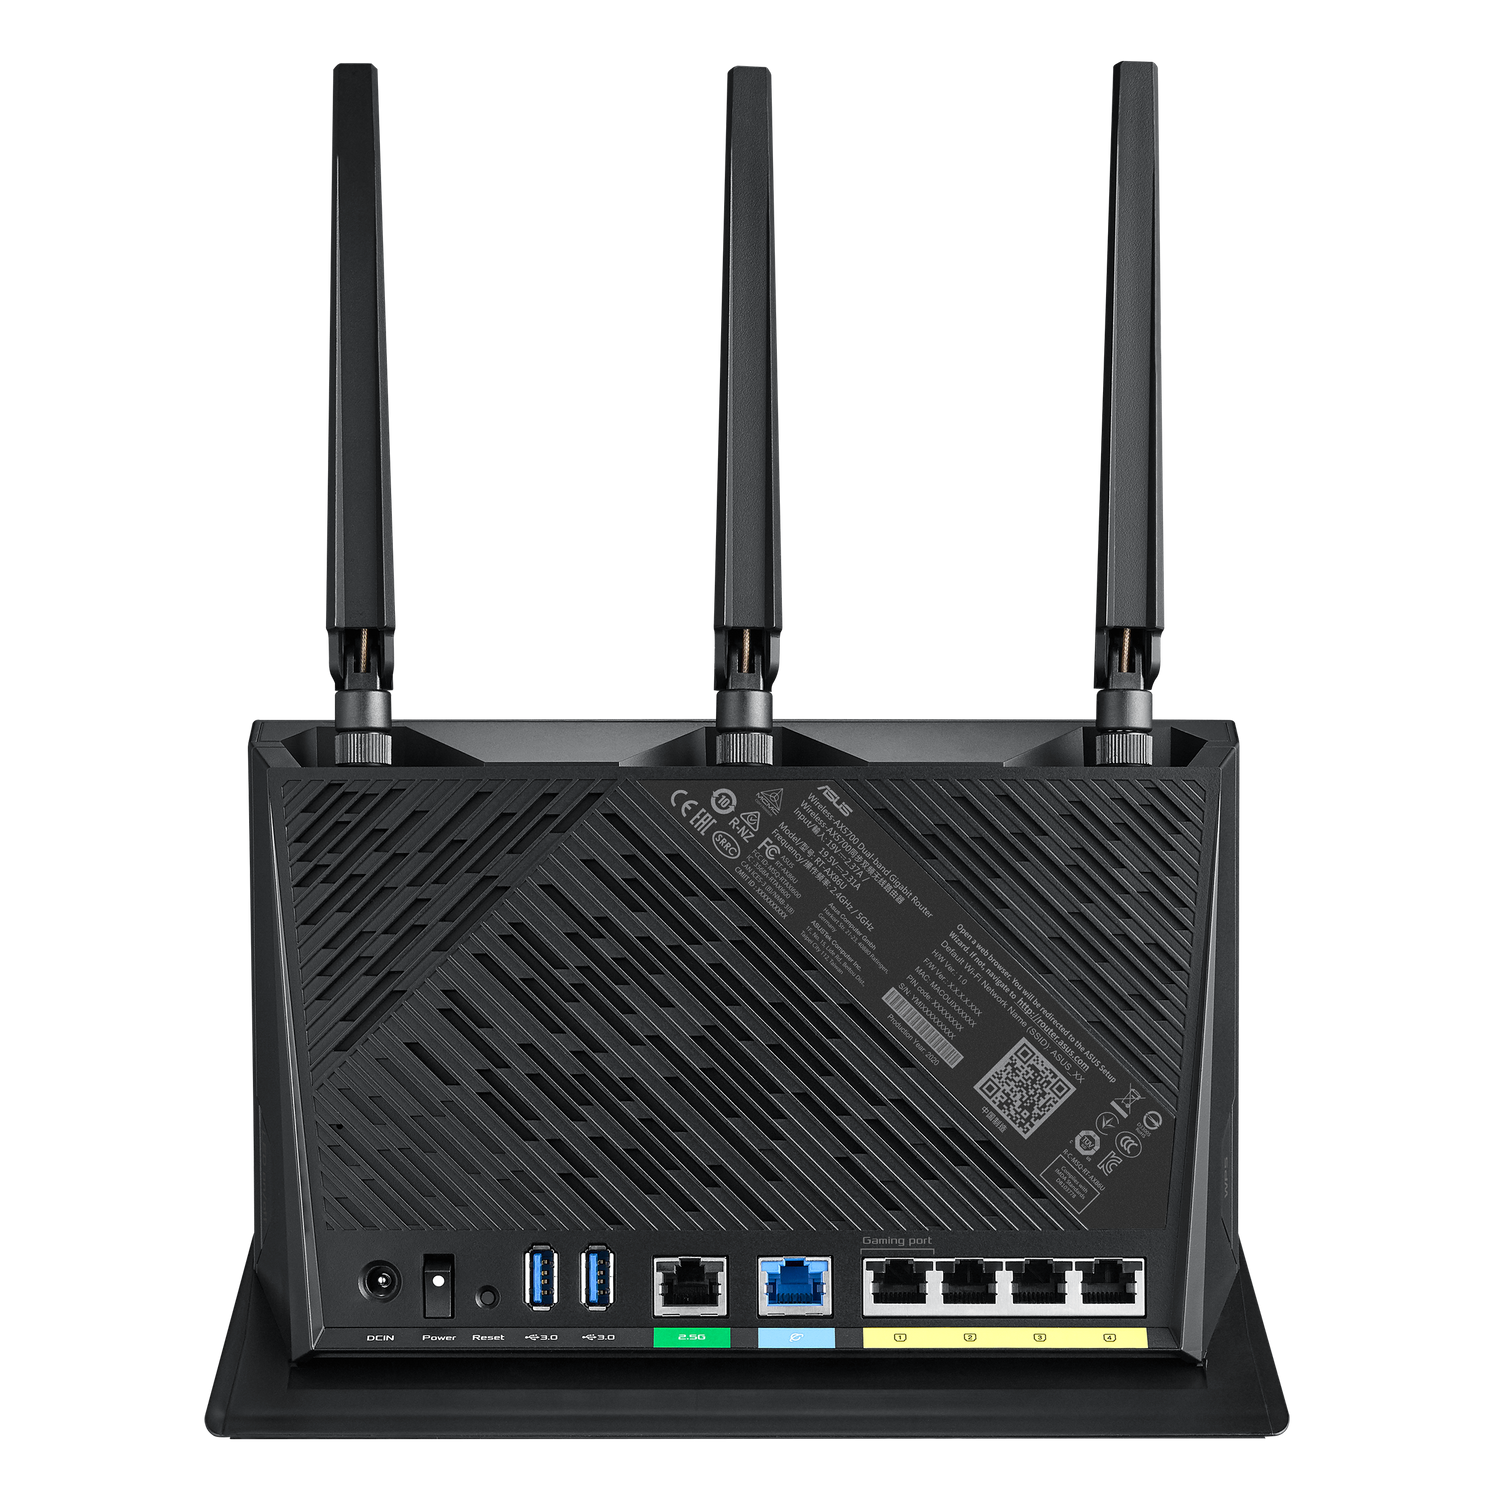 ASUS RT-AX86S AX5700 WLAN ROUTER